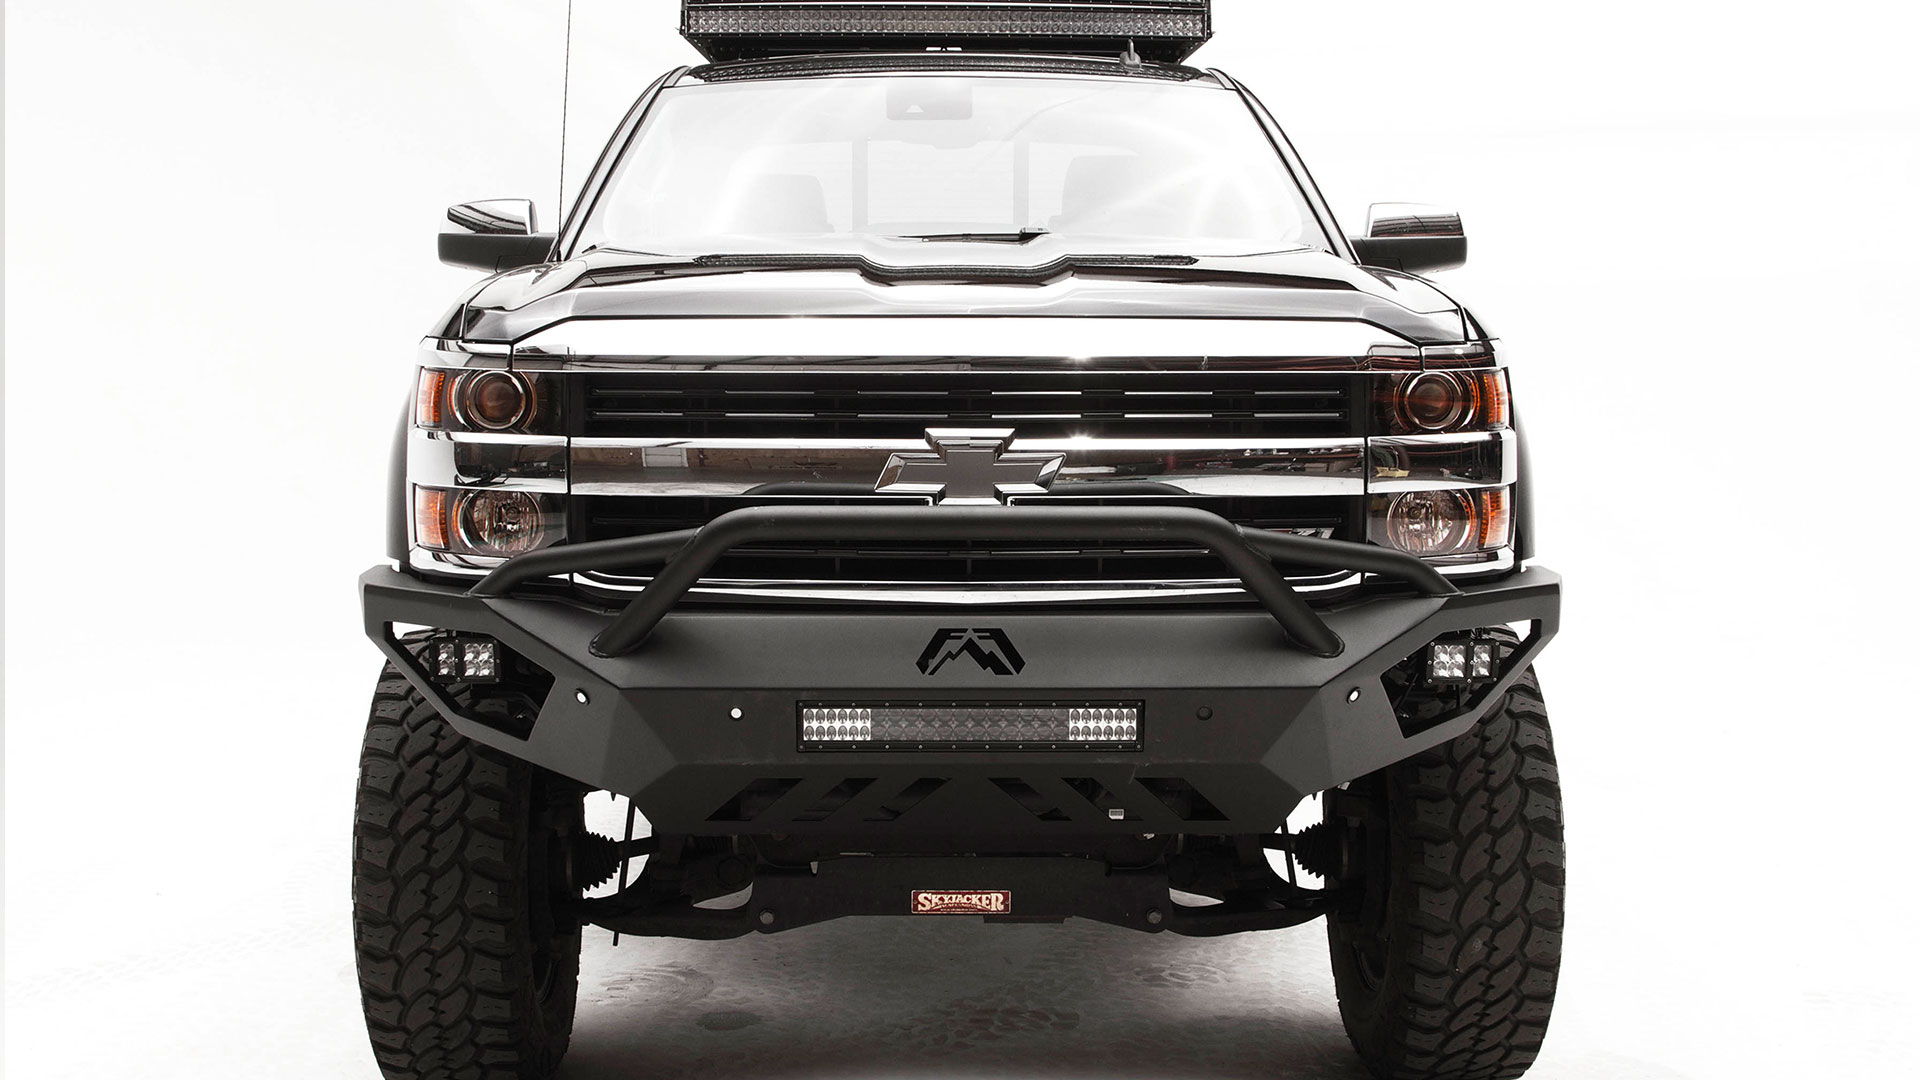 NEW Textured Front Bumper Top Cover for 2003-2007 Silverado 2500 3500 HD Pickup 